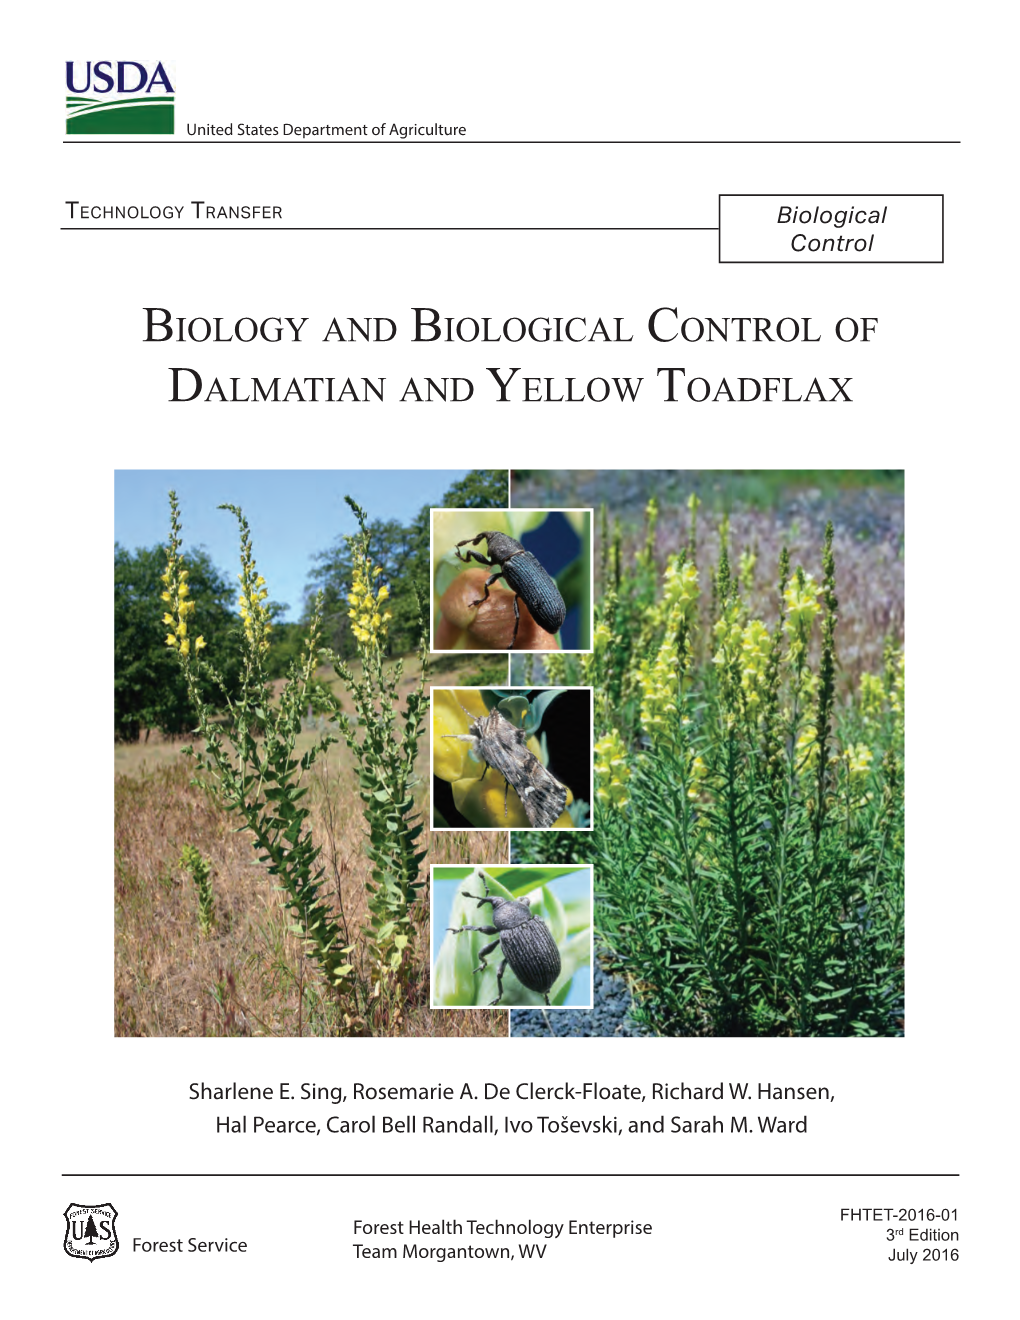 Biology and Biological Control of Dalmatian and Yellow Toadflax. USDA Forest Service, Forest Health Technology Enterprise Team, Morgantown, West Virginia